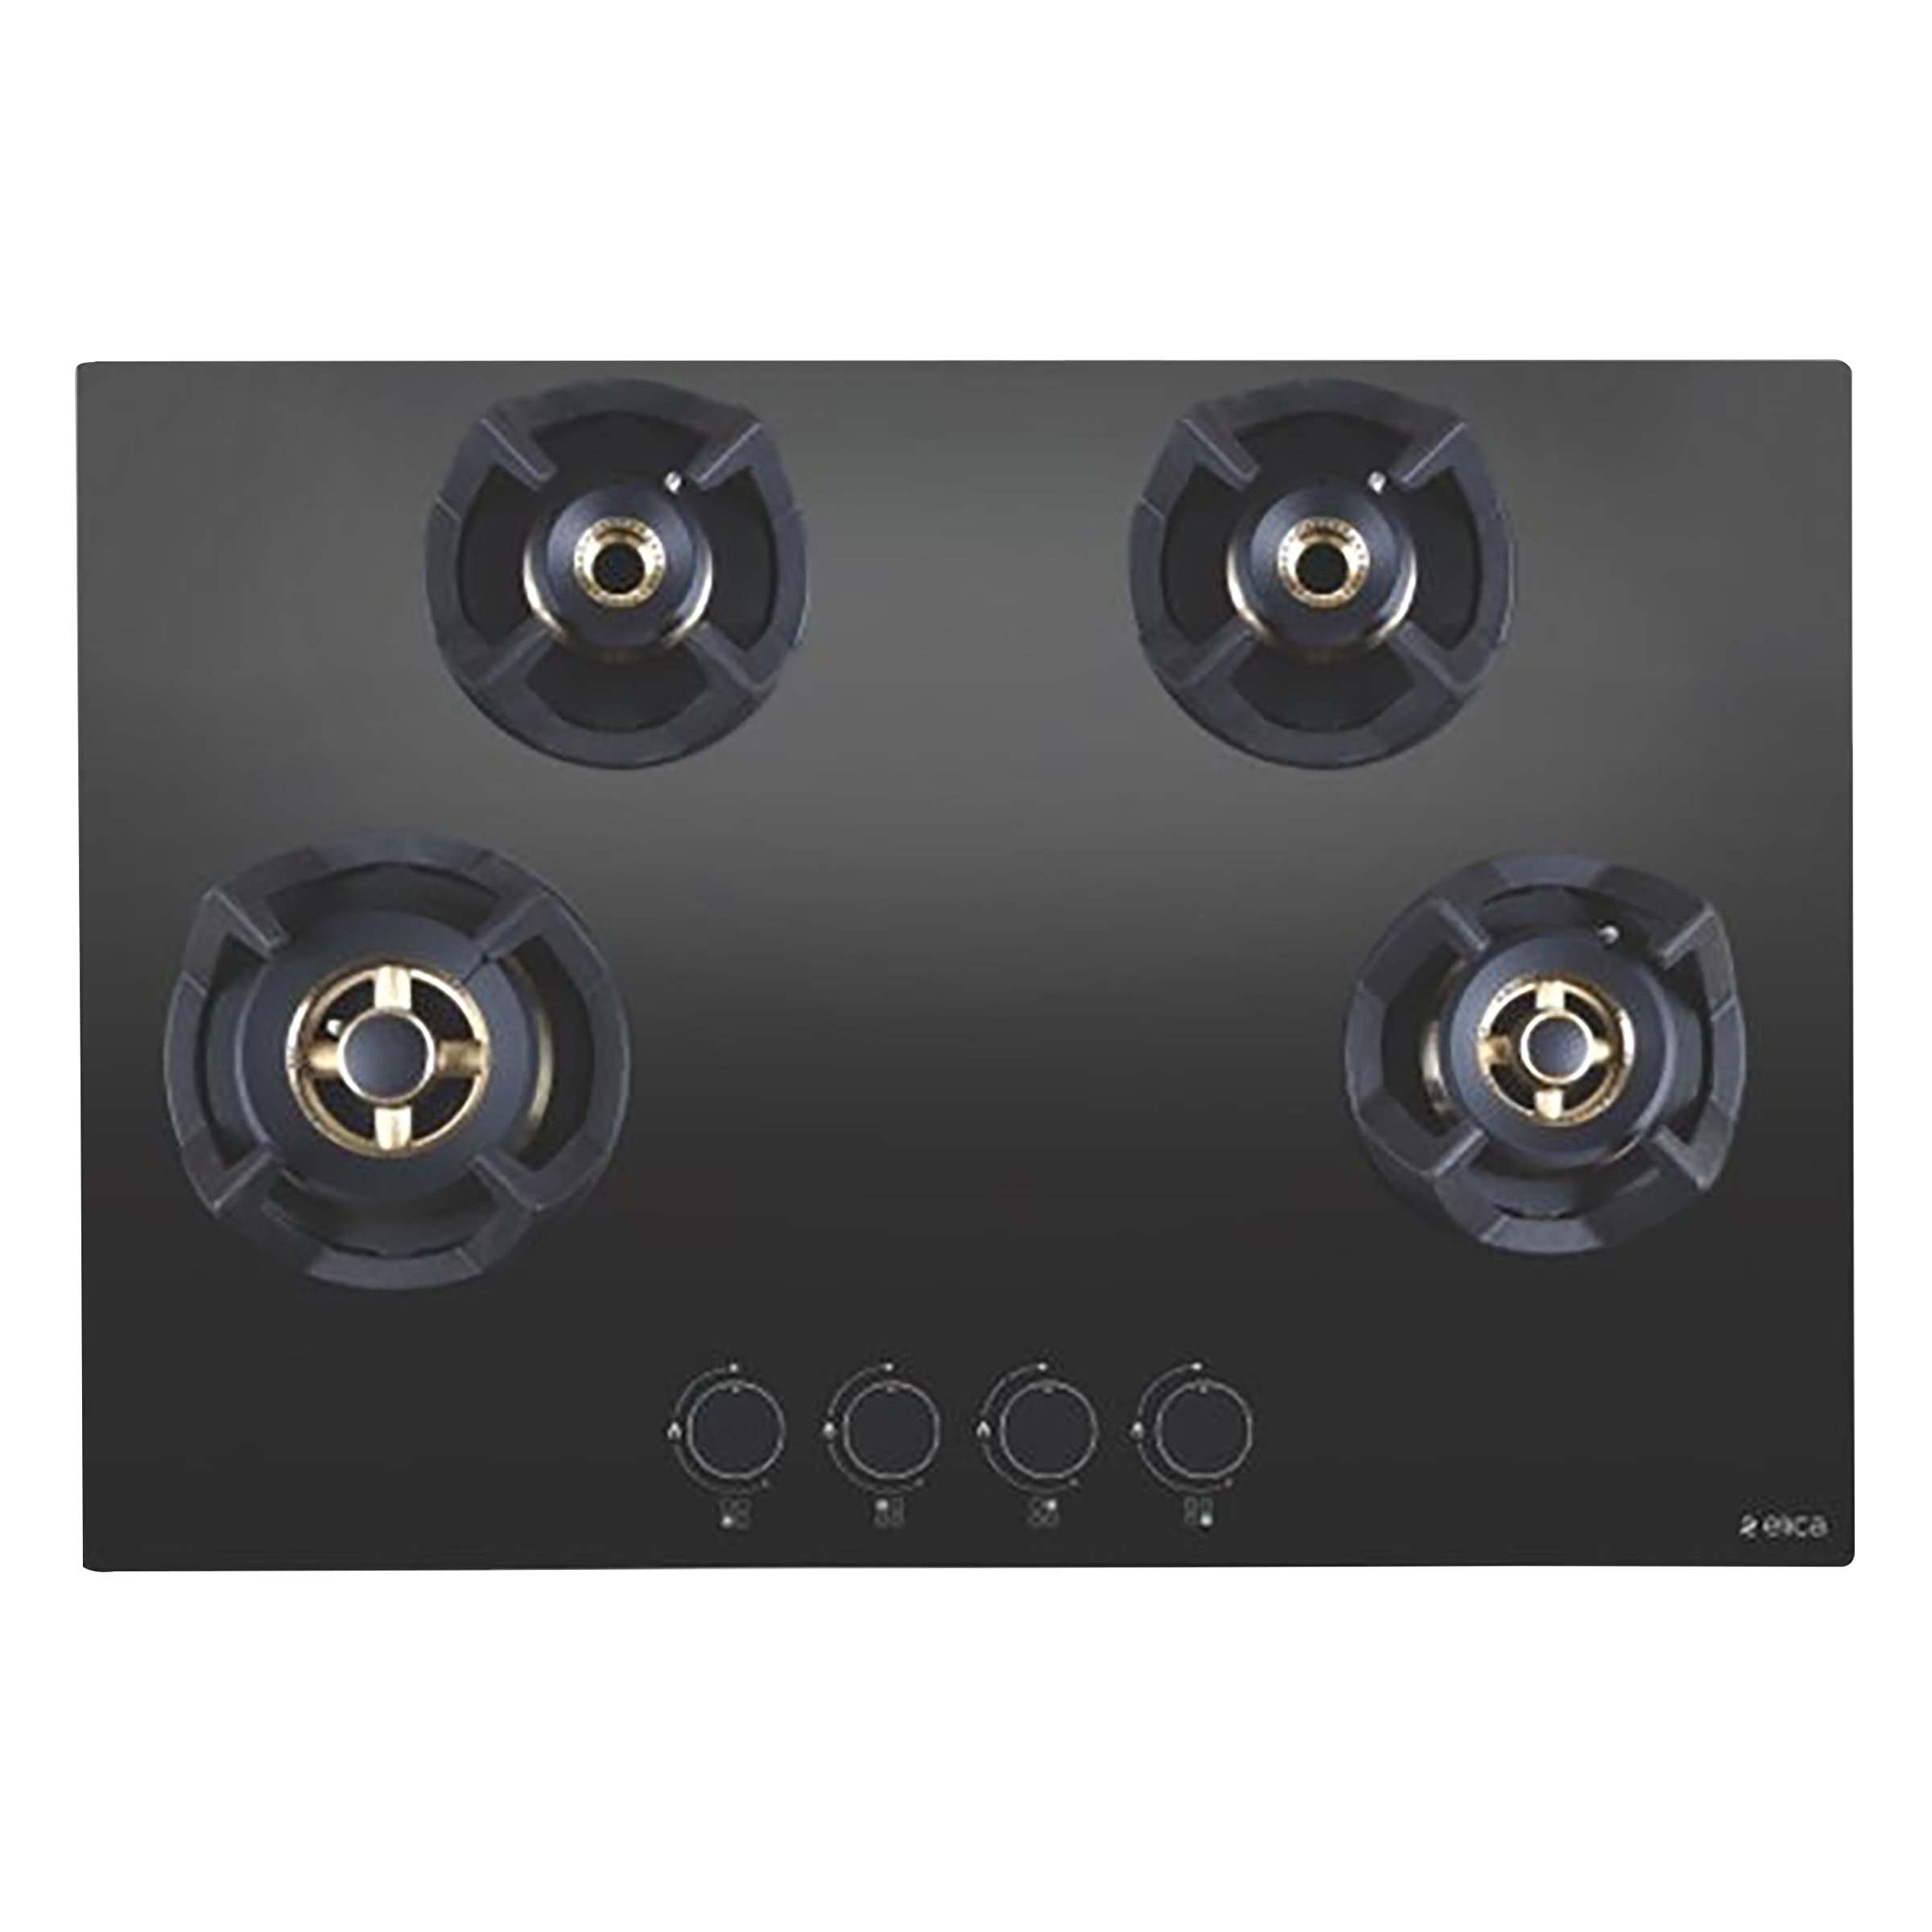 Elica Classic Flexi FB MFC 4 Burner Glass Built-in Electric Cooktop (Electric Auto Ignition, 3092, Black)_1